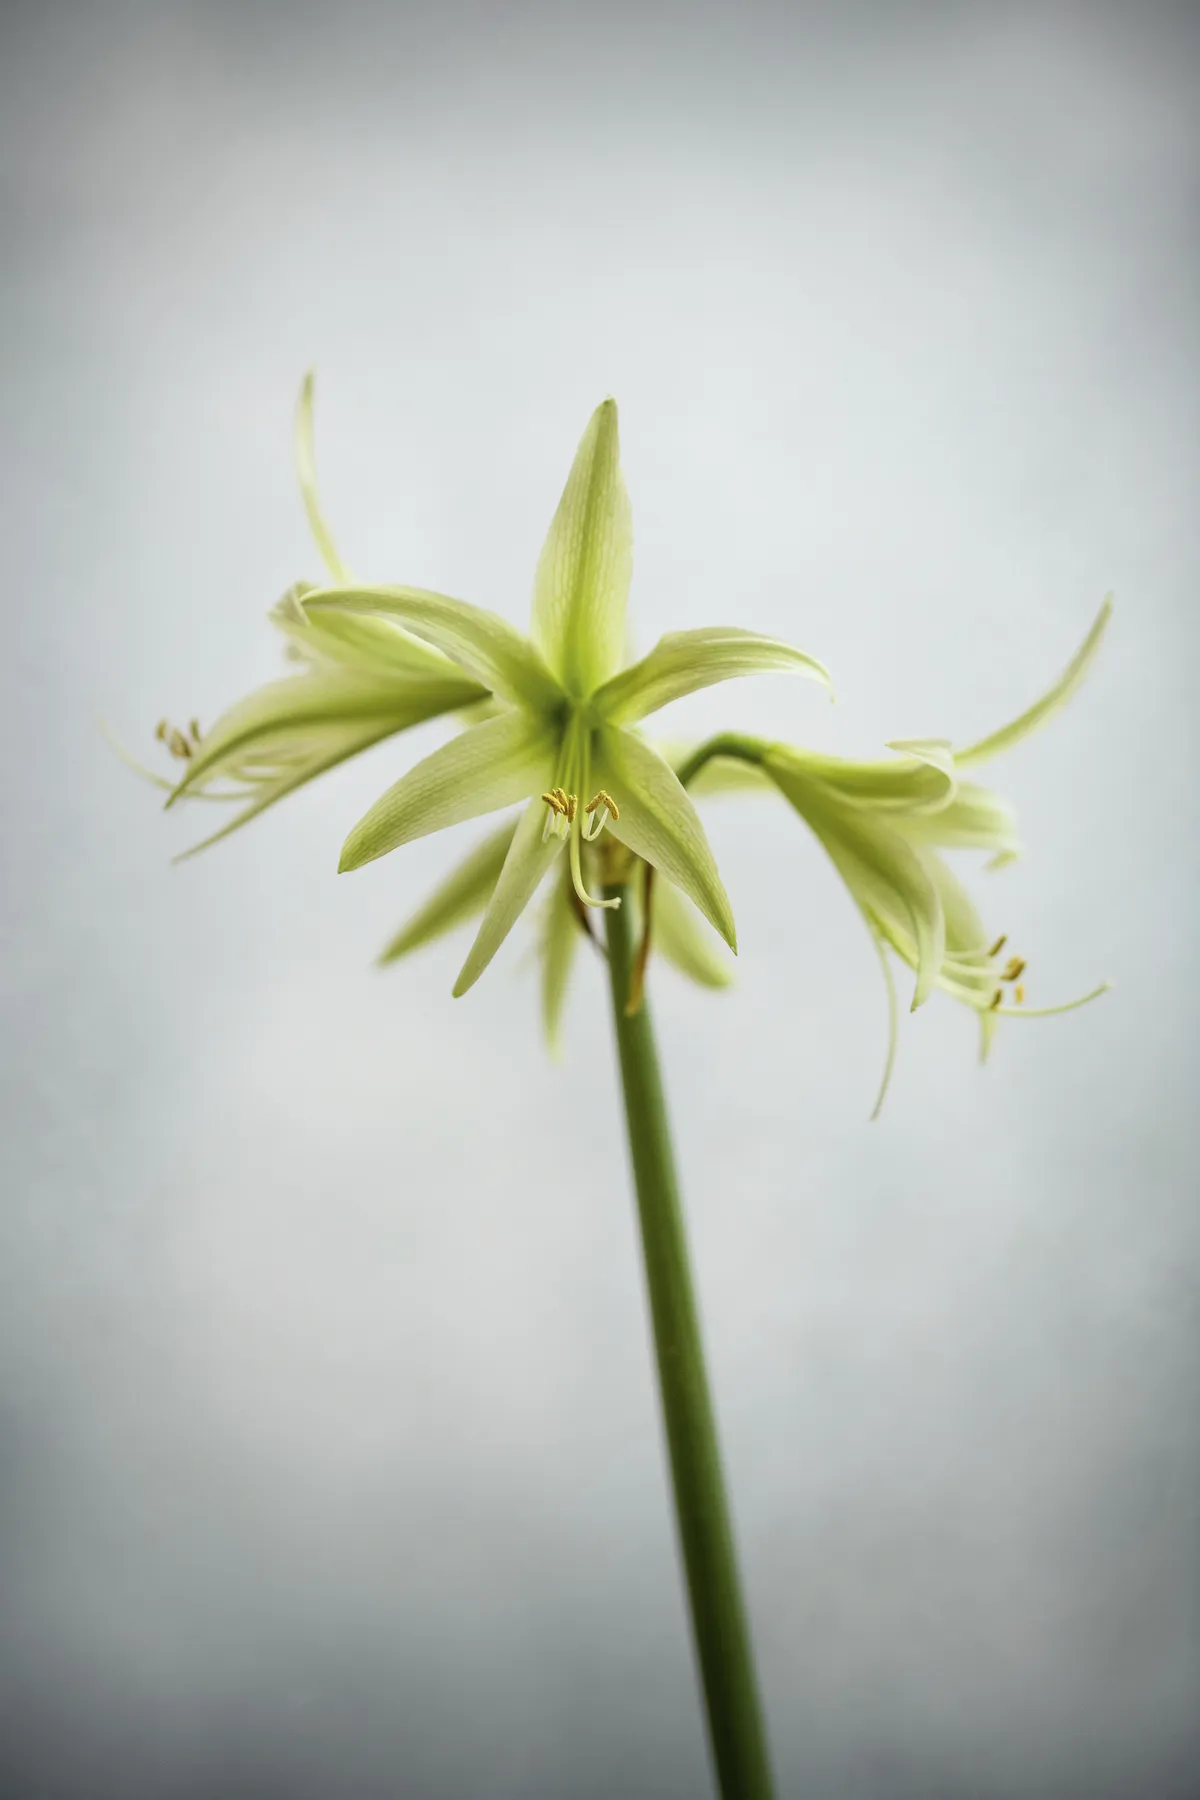  Hippeastrum ‘Evergreen’ Its narrow, flaring petals are lime green, becoming darker towards the centre of the flower, from where the green stamens protrude. It belongs to the Spider Group and must be one of the most subtle and stylish amaryllis. 50cm. AGM*. RHS H2.